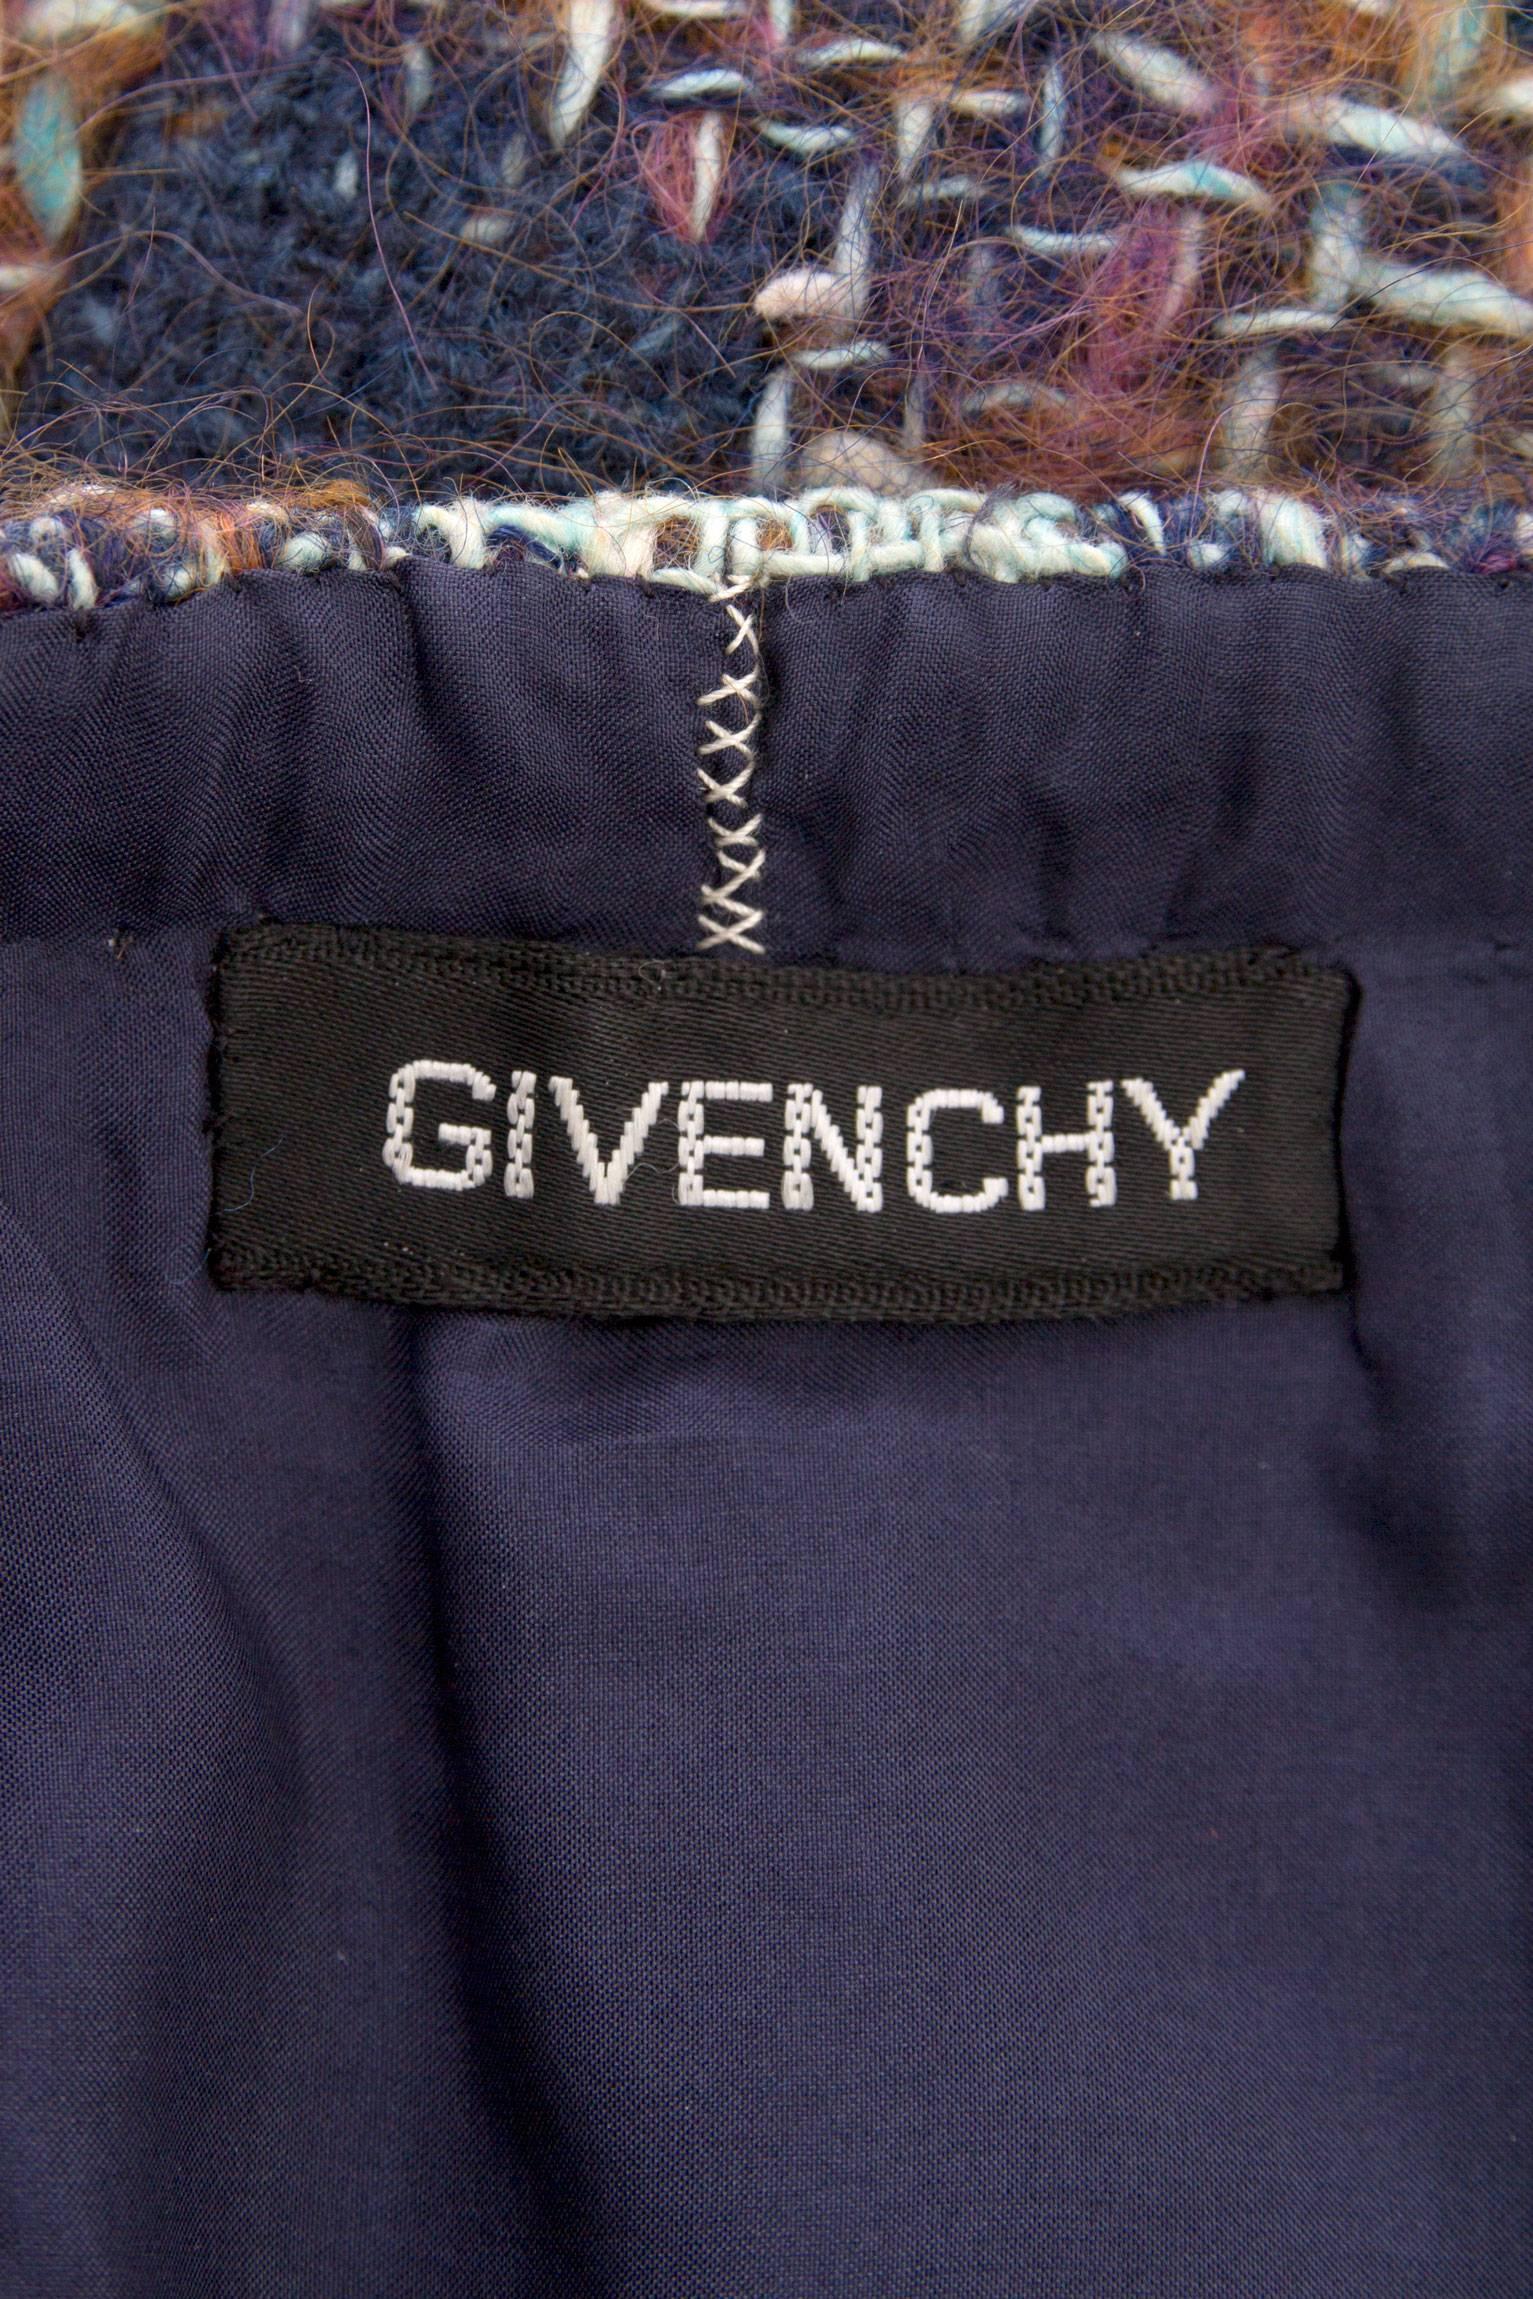 A 1970s Givenchy haute couture boucle a-line skirt held in complementing hues of blue and purple. The skirt has a conservative length cutting just below the knee but has two splits providing a feminine edge. A side zipper adds a finishing touch in